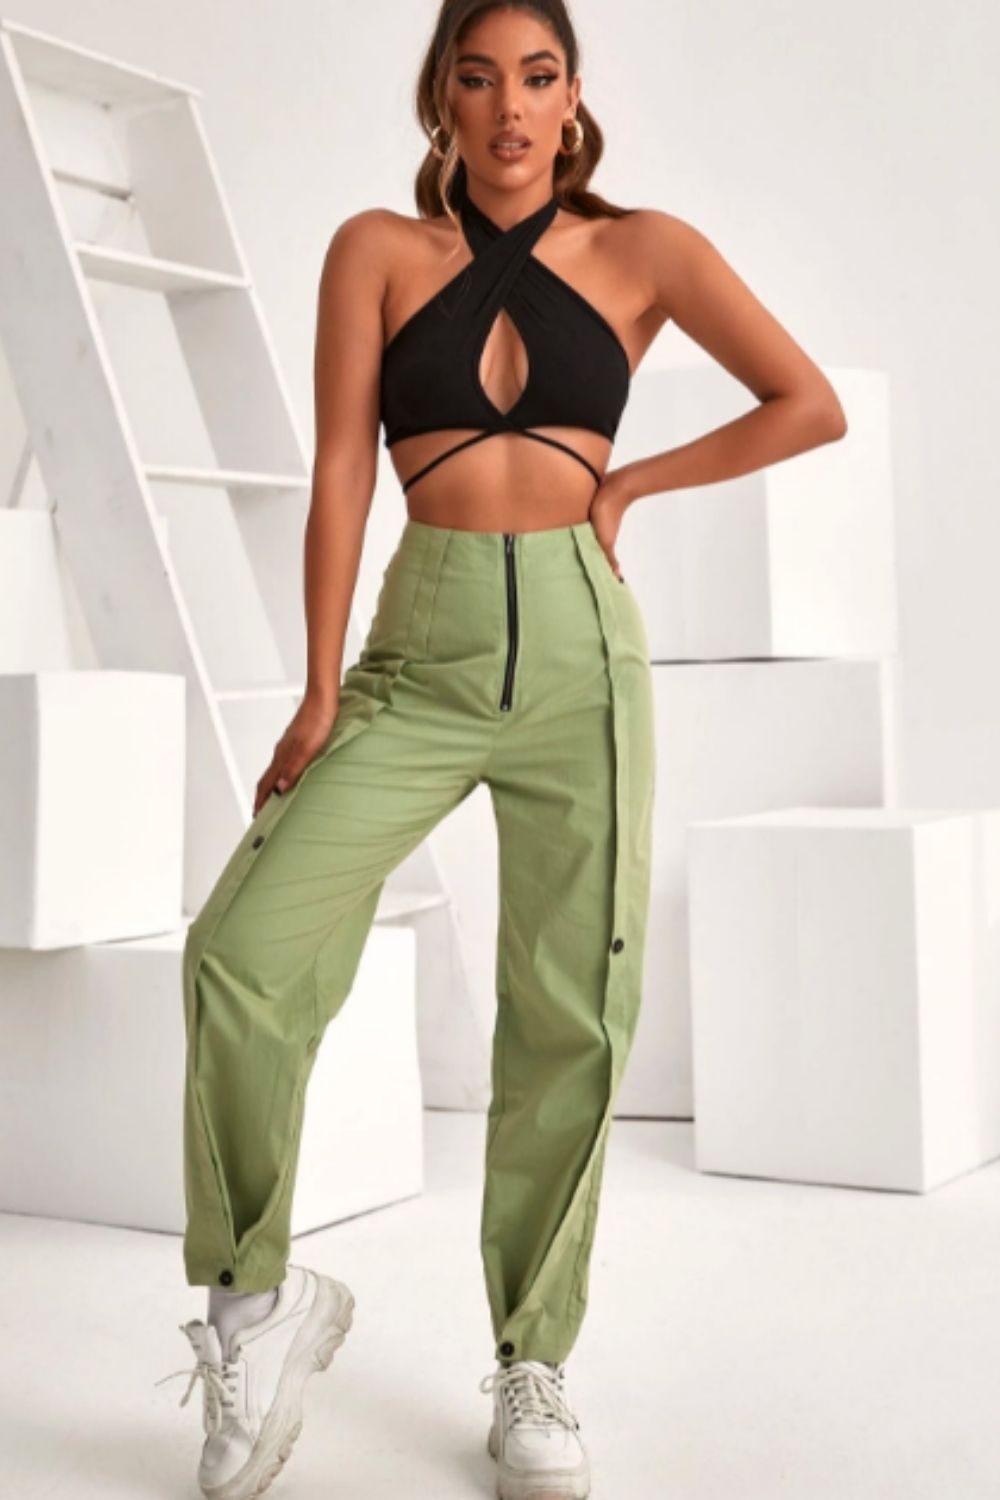 Halter neck backless crop top – Styched Fashion